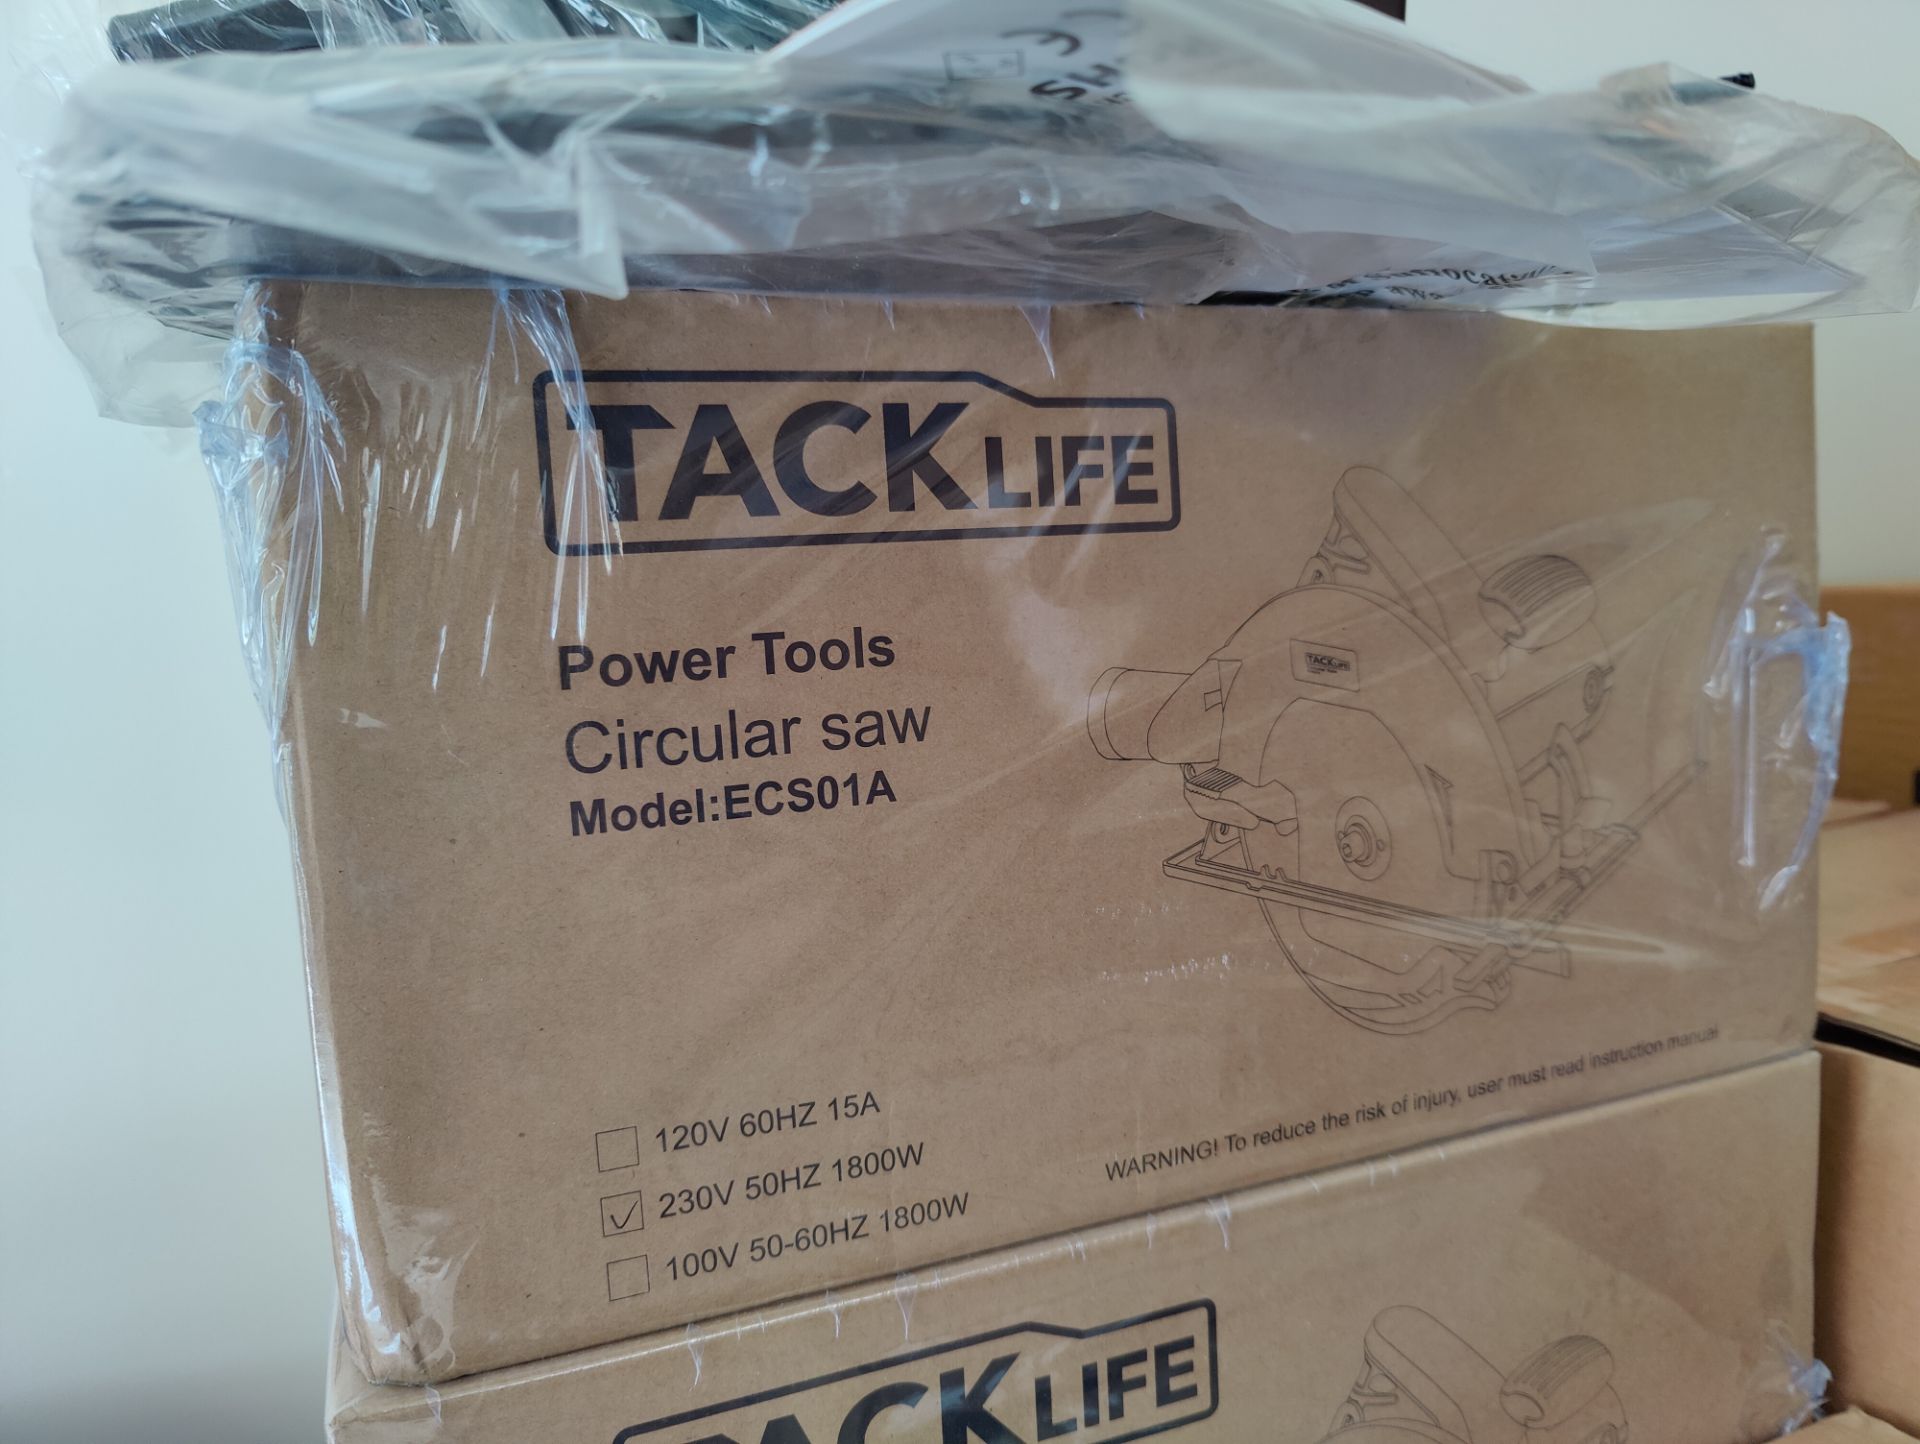 2 x Trade Lot New Boxed Tacklife Electric Circular Saw, 1500W, 5000 RPM With Bevel Cuts 2-3/5' - Image 3 of 4